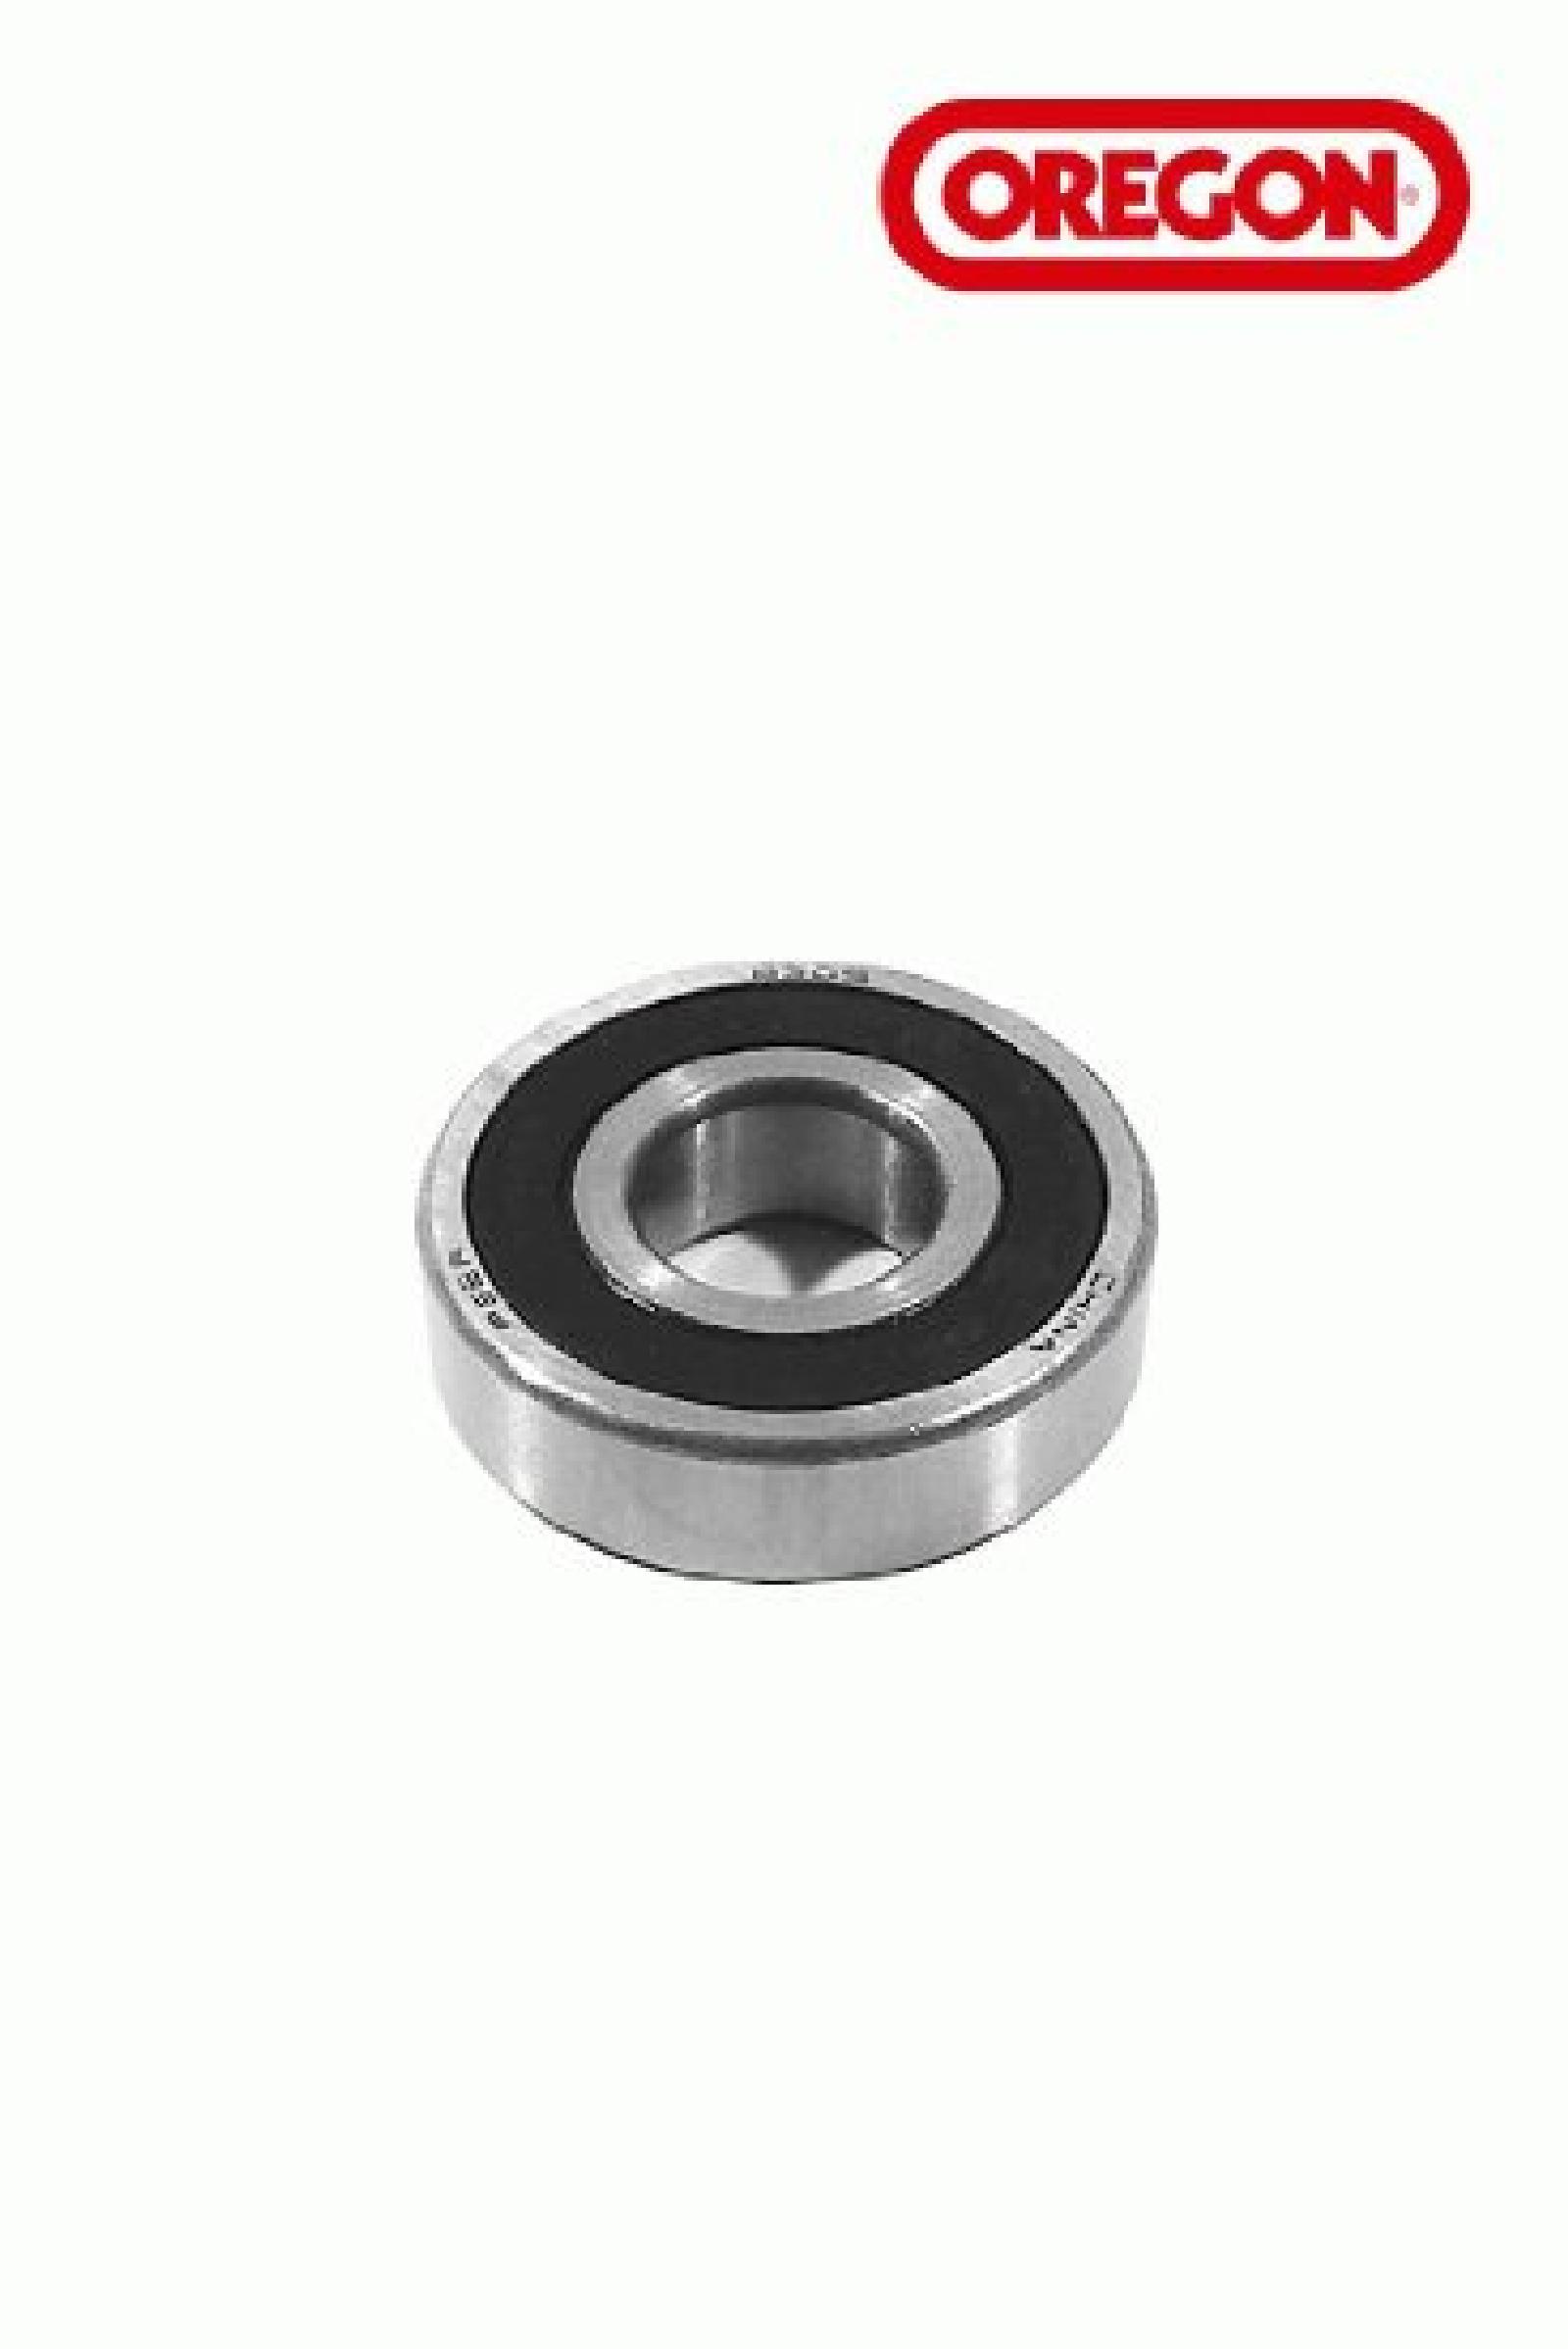 BEARING, BALL MAGNUM 6305 part# 45-220 by Oregon - Click Image to Close